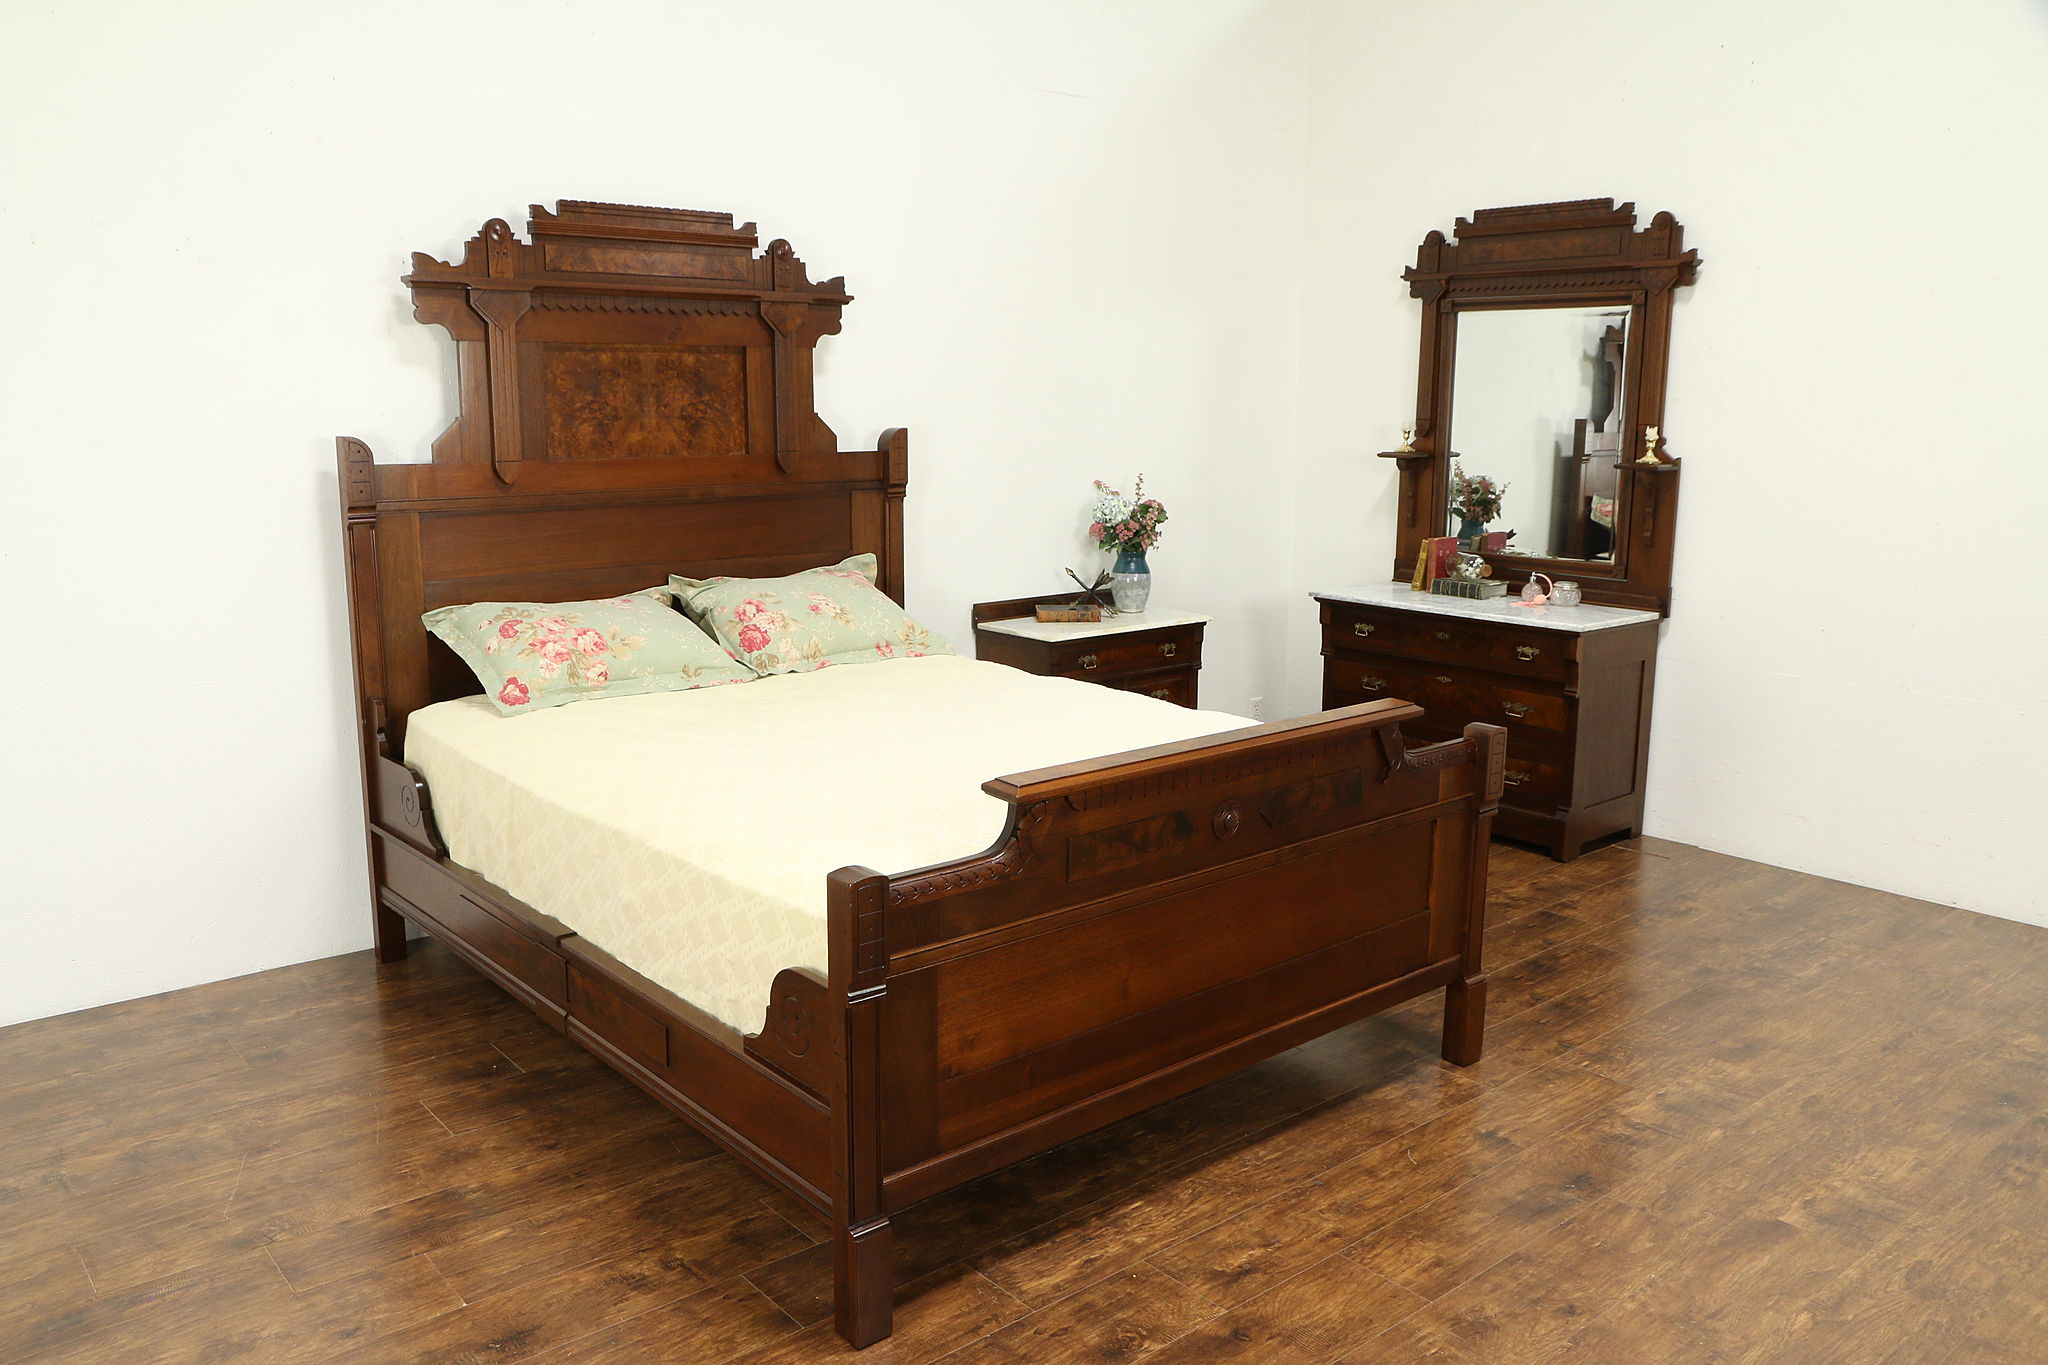 Sold Victorian Eastlake Antique Queen Size 3 Pc Bedroom Set Marble Tops 31762 Harp Gallery Antiques Furniture,Chair And A Half Glider